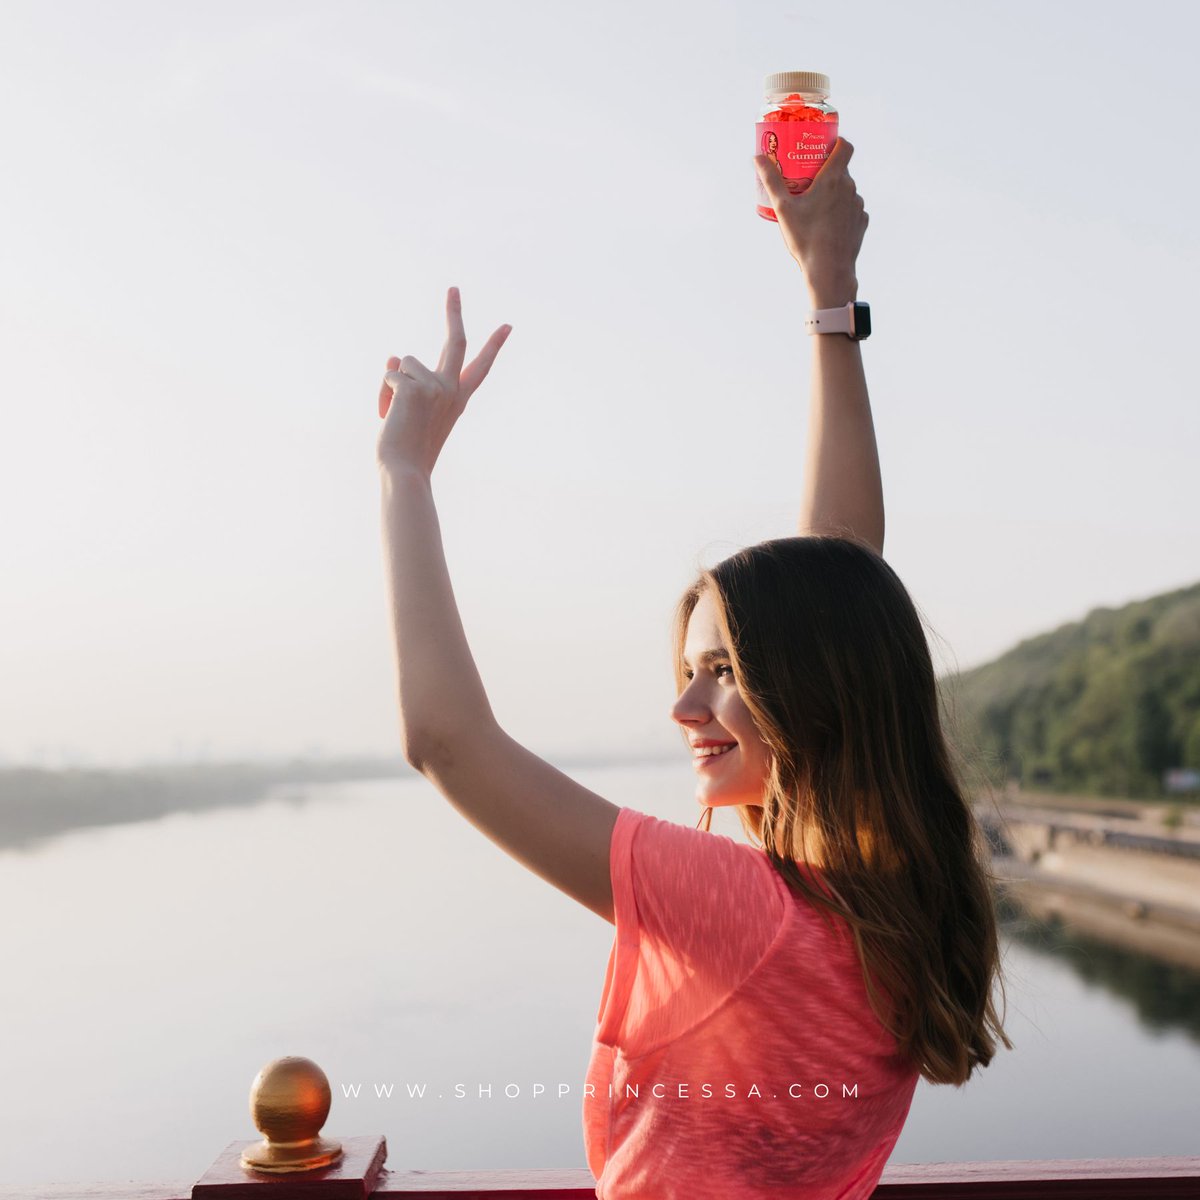 Infuse your wellness journey with #PRINCESSABeautyGummies. 🌟 Nourish your body and soul by the serene lake, one scrumptious gummy at a time! 🌊🌉 #WellnessWarrior #NatureNurturesBeauty

Take this journey with us when by purchasing our wellness gummies at shopprincessa.com/gummies.